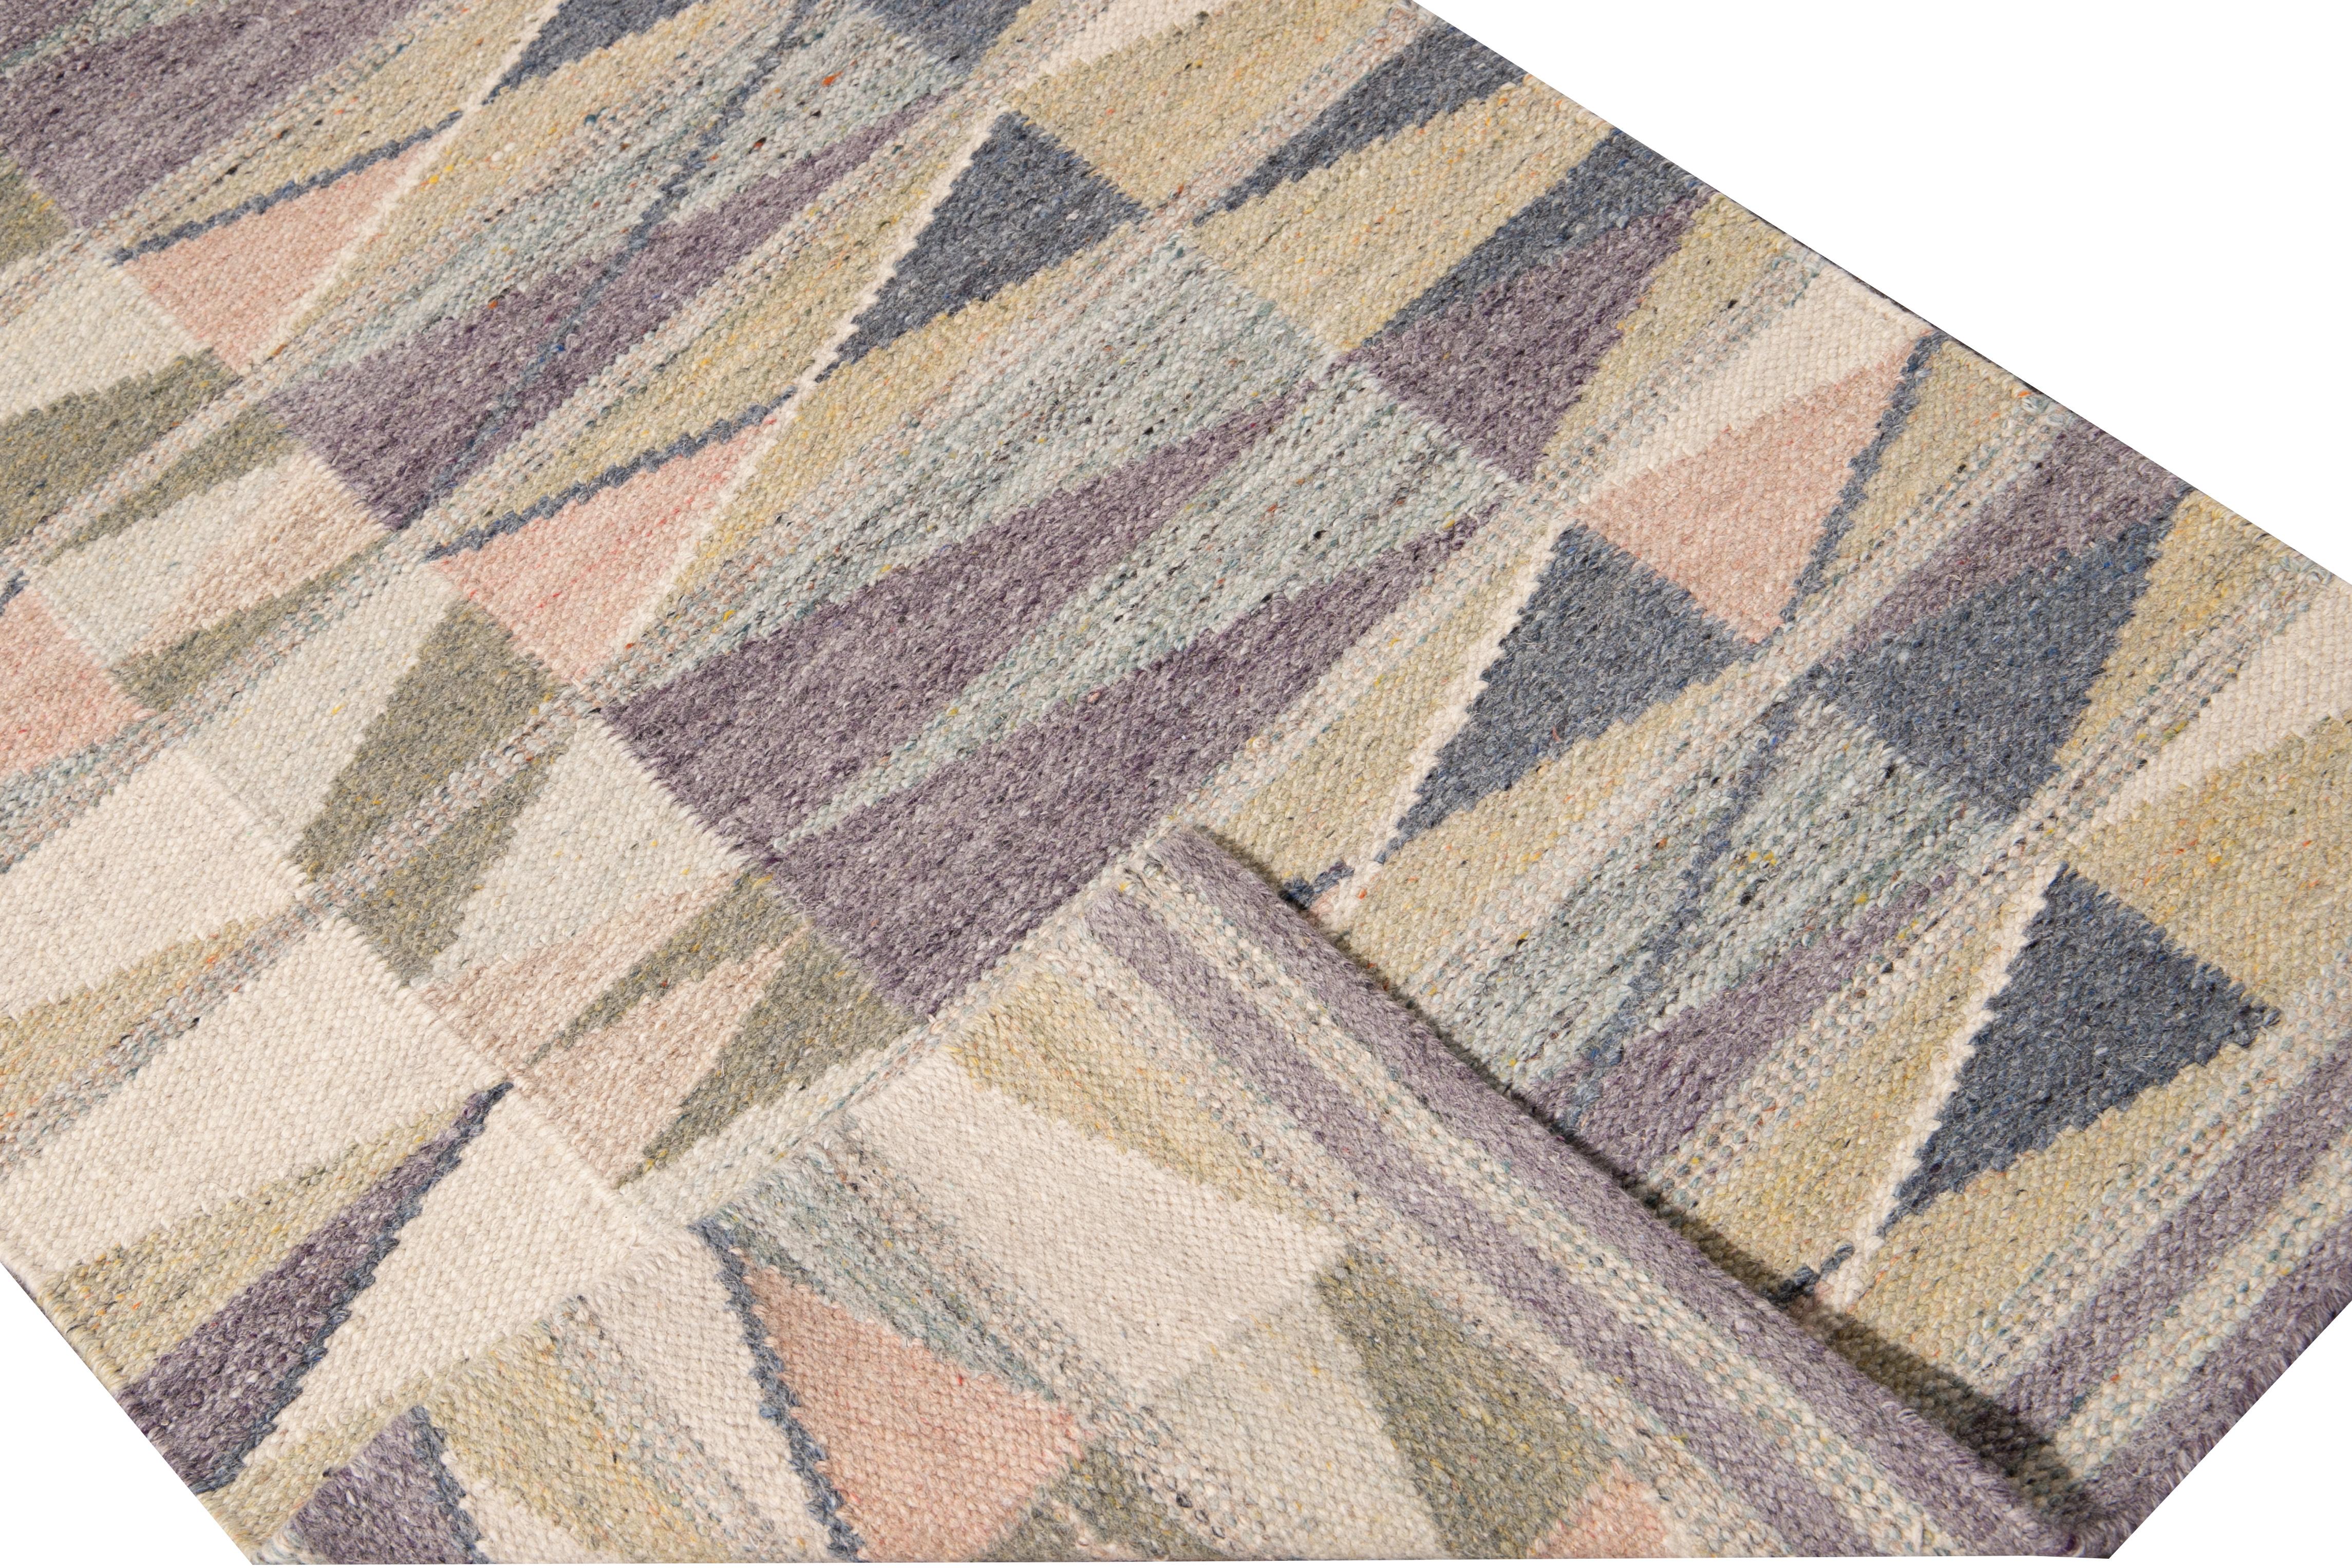 Beautiful modern long Swedish hand-knotted wool runner with a beige field. This Swedish runner has accents of peach, green, and purple in an all-over geometric abstract design.

This rug measures: 3'1